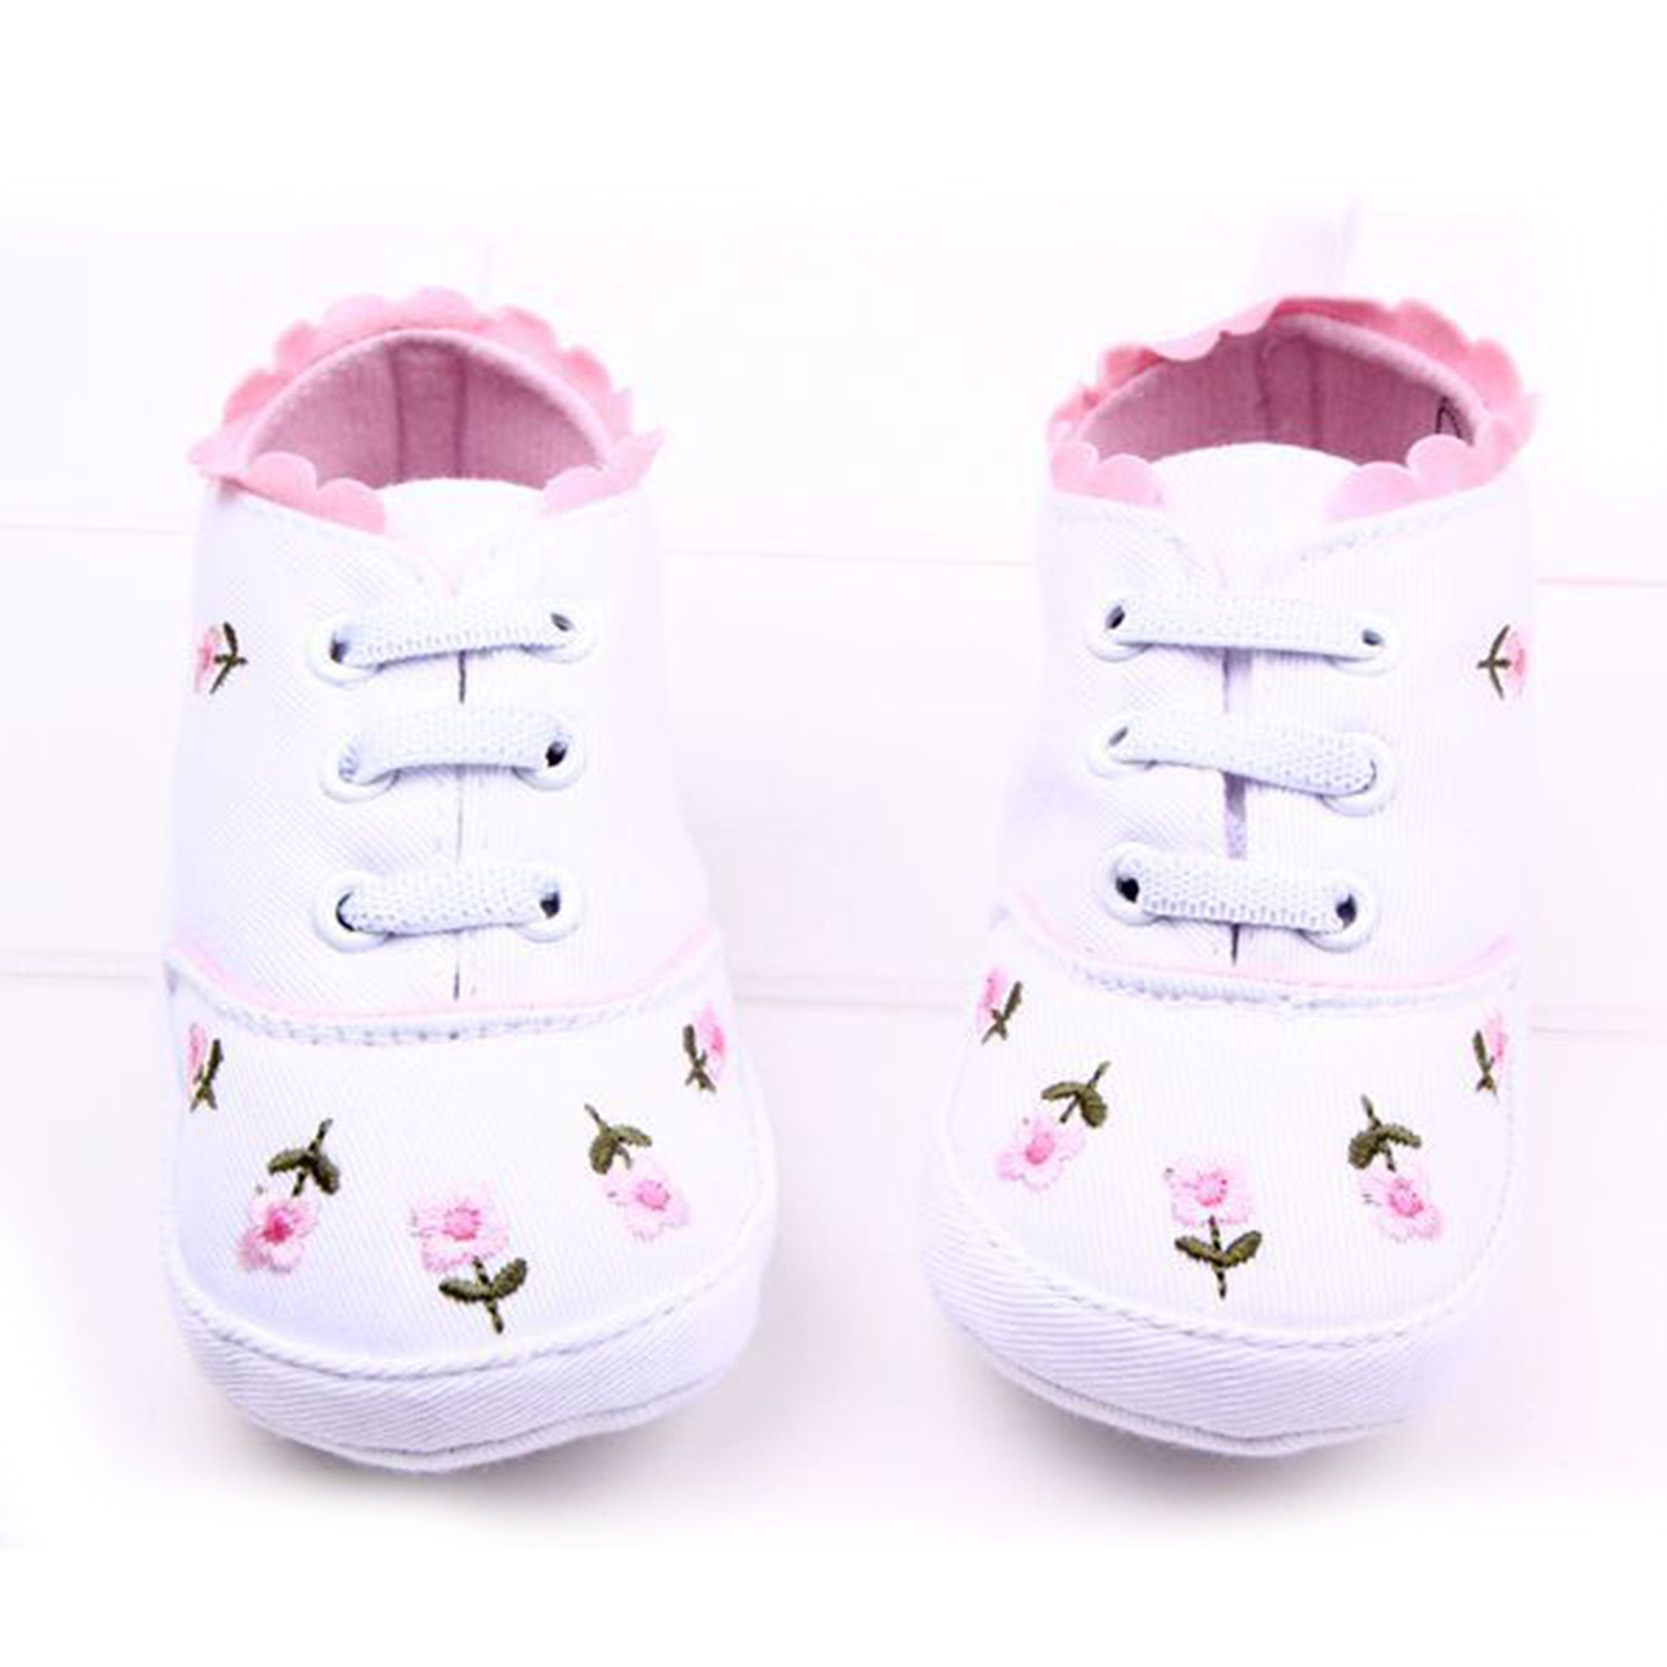 2015 Elegant Baby Shoes 3 Colors Little Lace Embroidered Cotton Shoes Soft Bottom Baby Girl Shoes